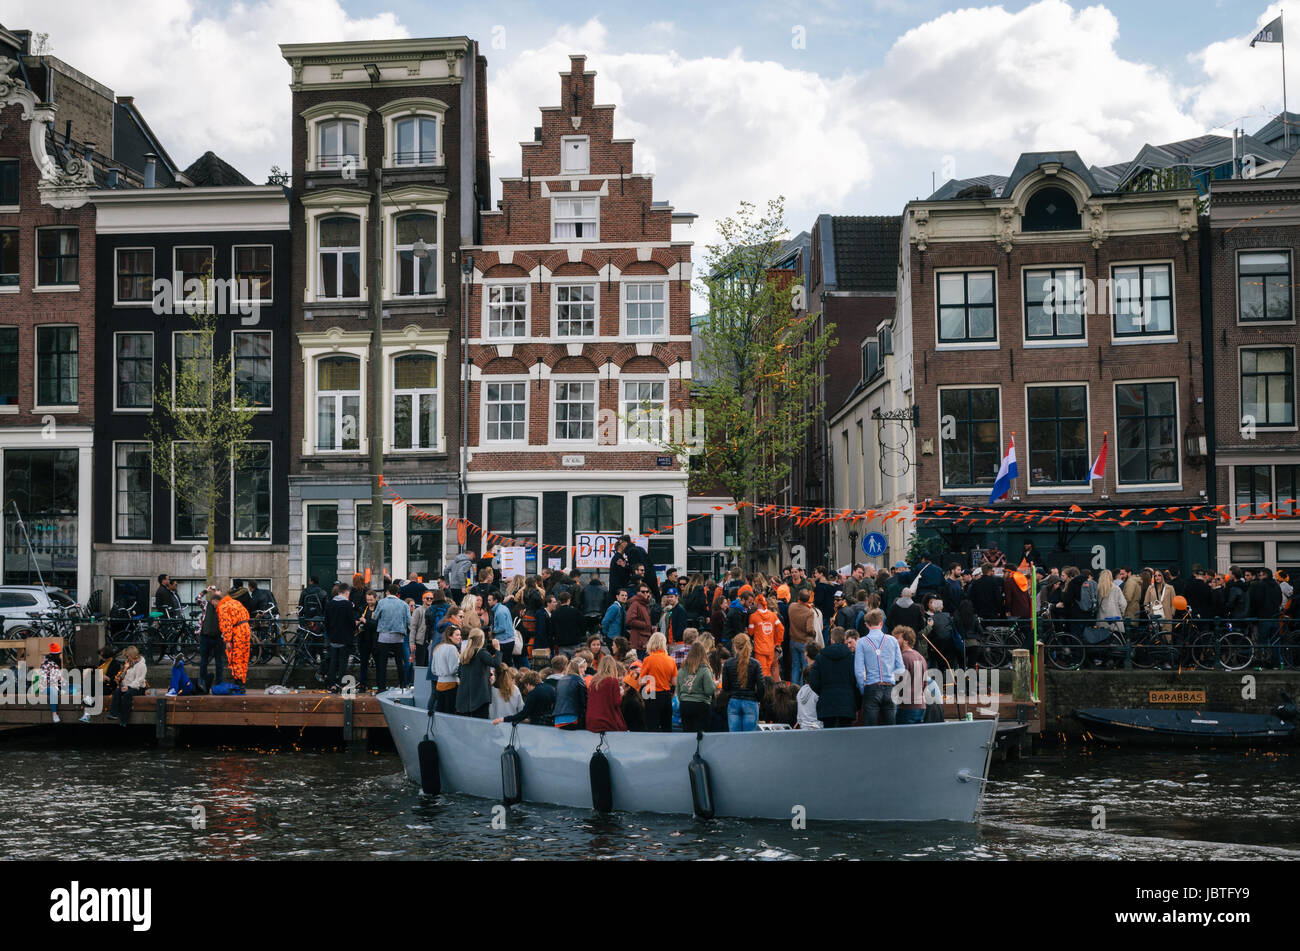 Amsterdam, Netherlands - 25 April, 2017: Local people and tourists dressed in orange clothes ride on boats and participate in celebrating King's Day a Stock Photo